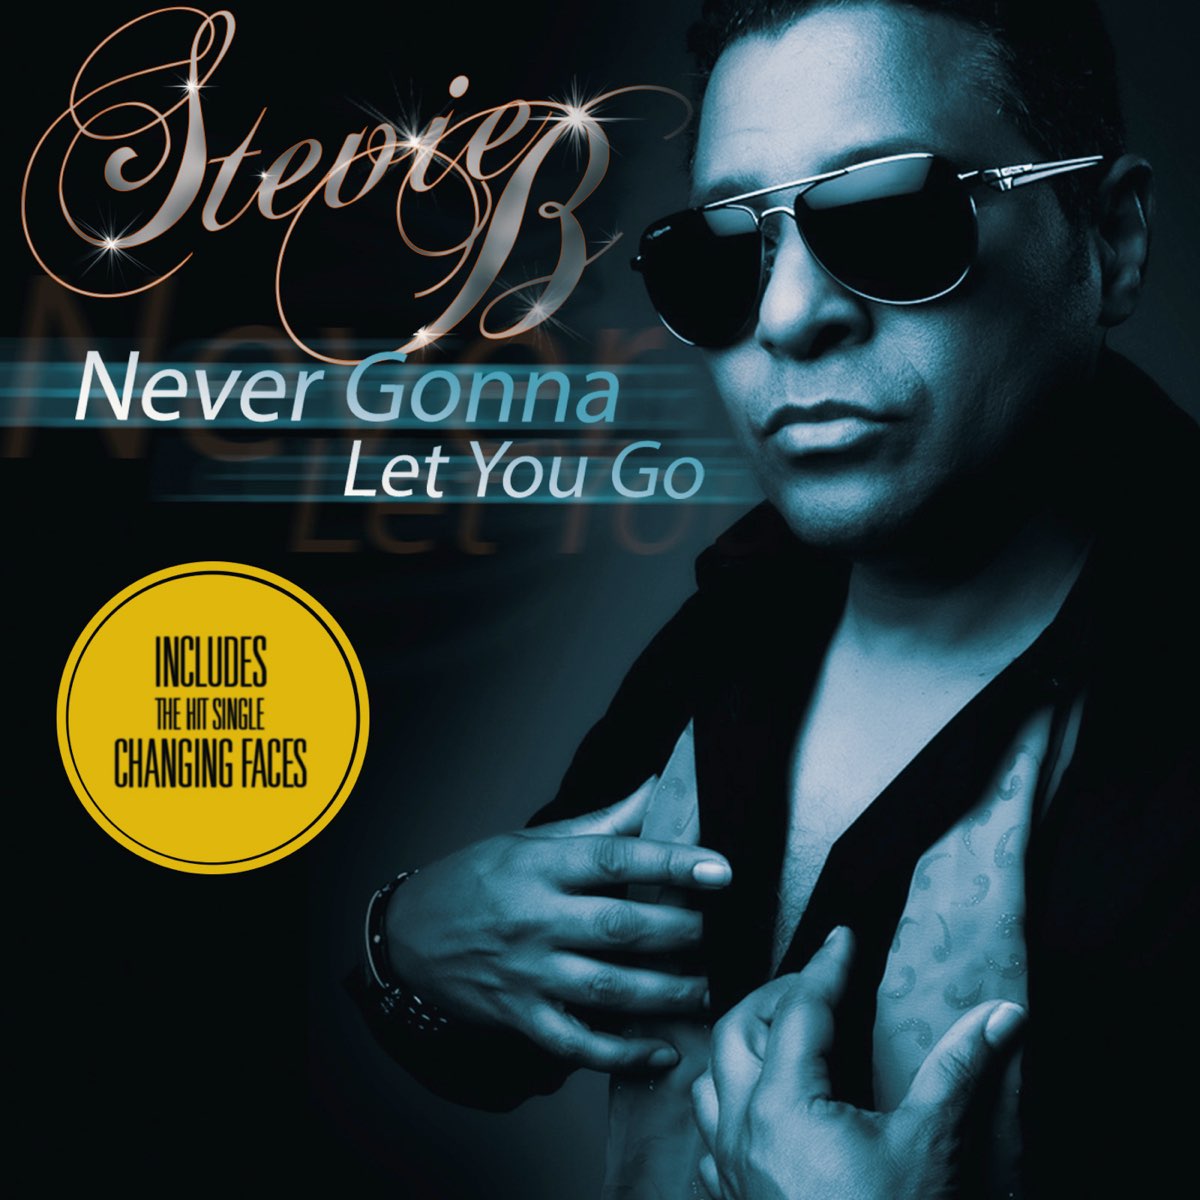 Never Gonna Let You Go by Stevie B on Apple Music